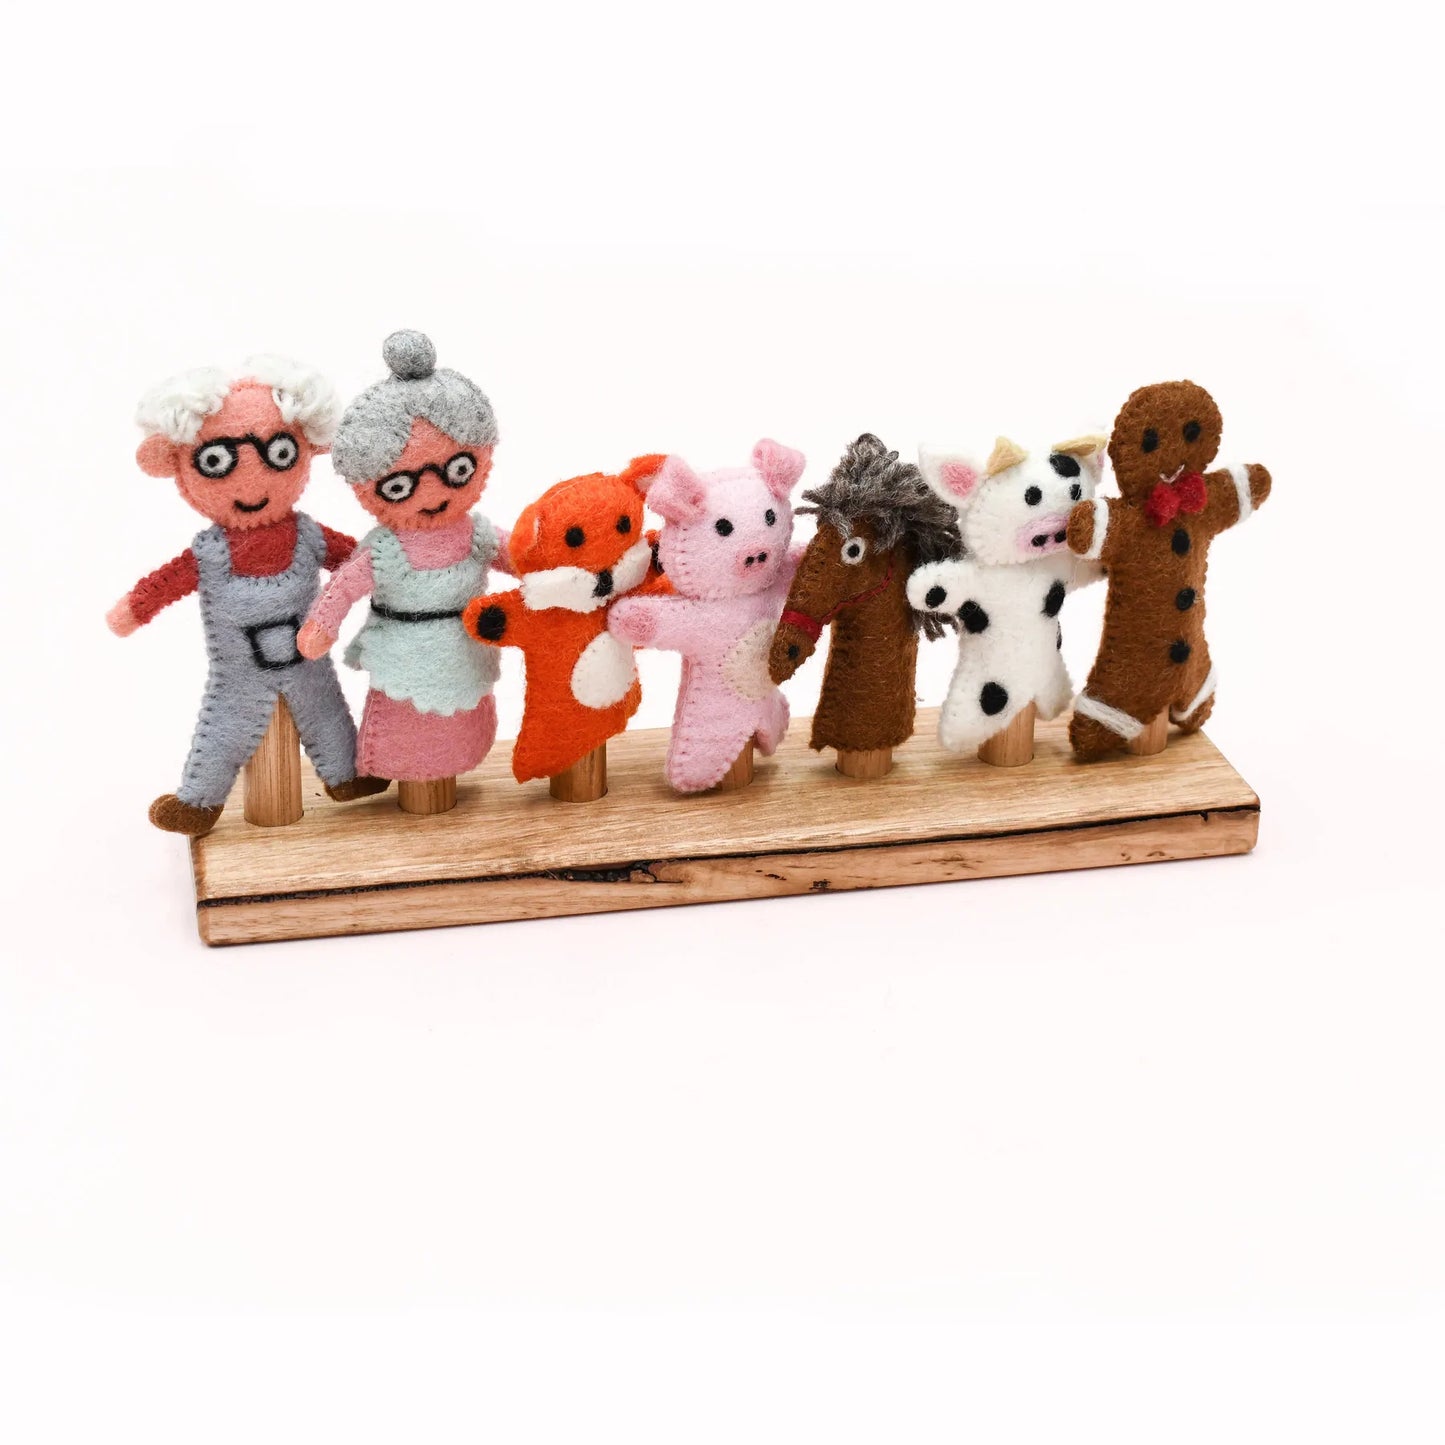 Finger Puppet Stand - 7 rods